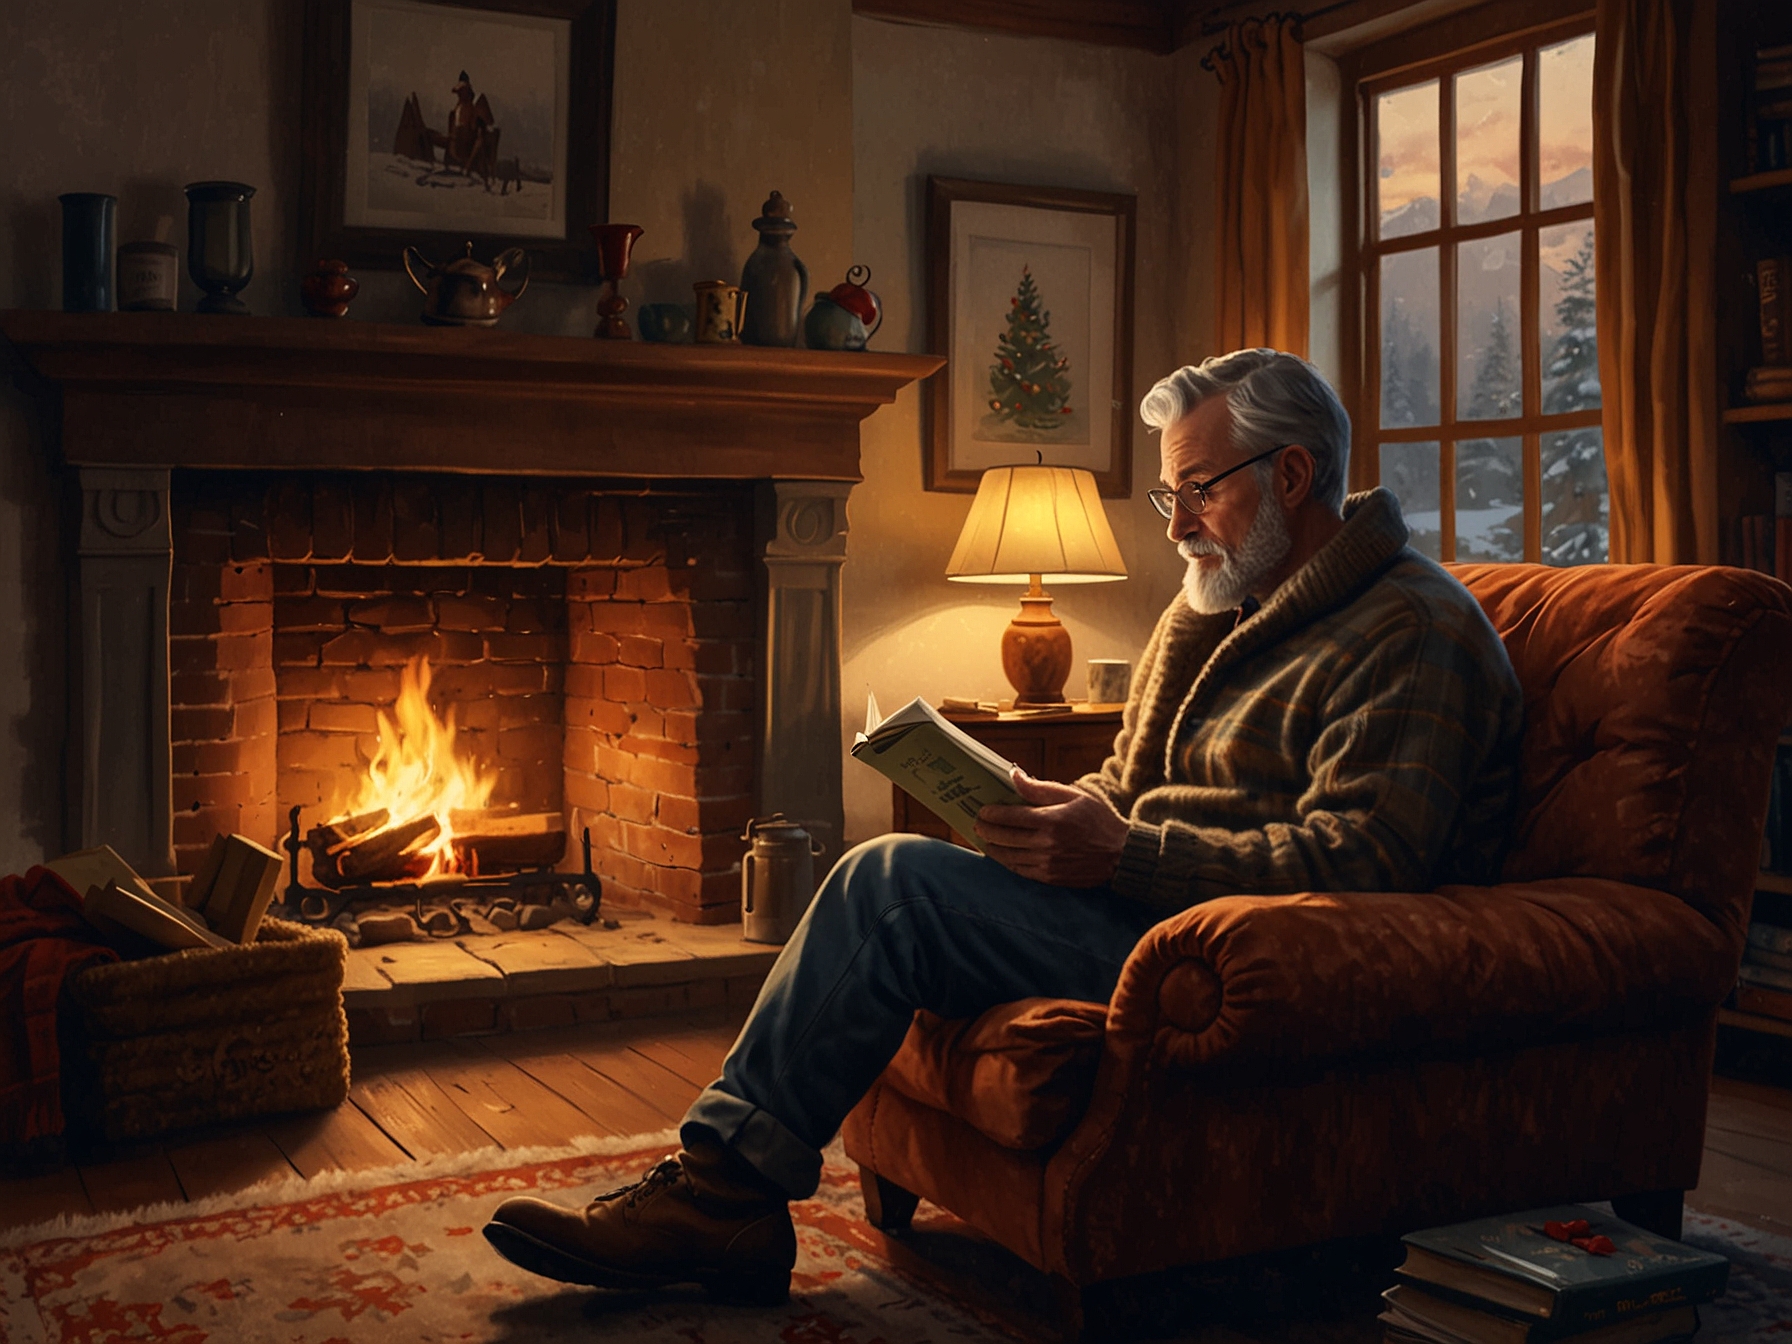 A person sitting comfortably by a fireplace, reading 'Our Holiday' with a steaming mug of cocoa beside them. The scene exudes warmth and anticipation, ideal for a captivating winter read.